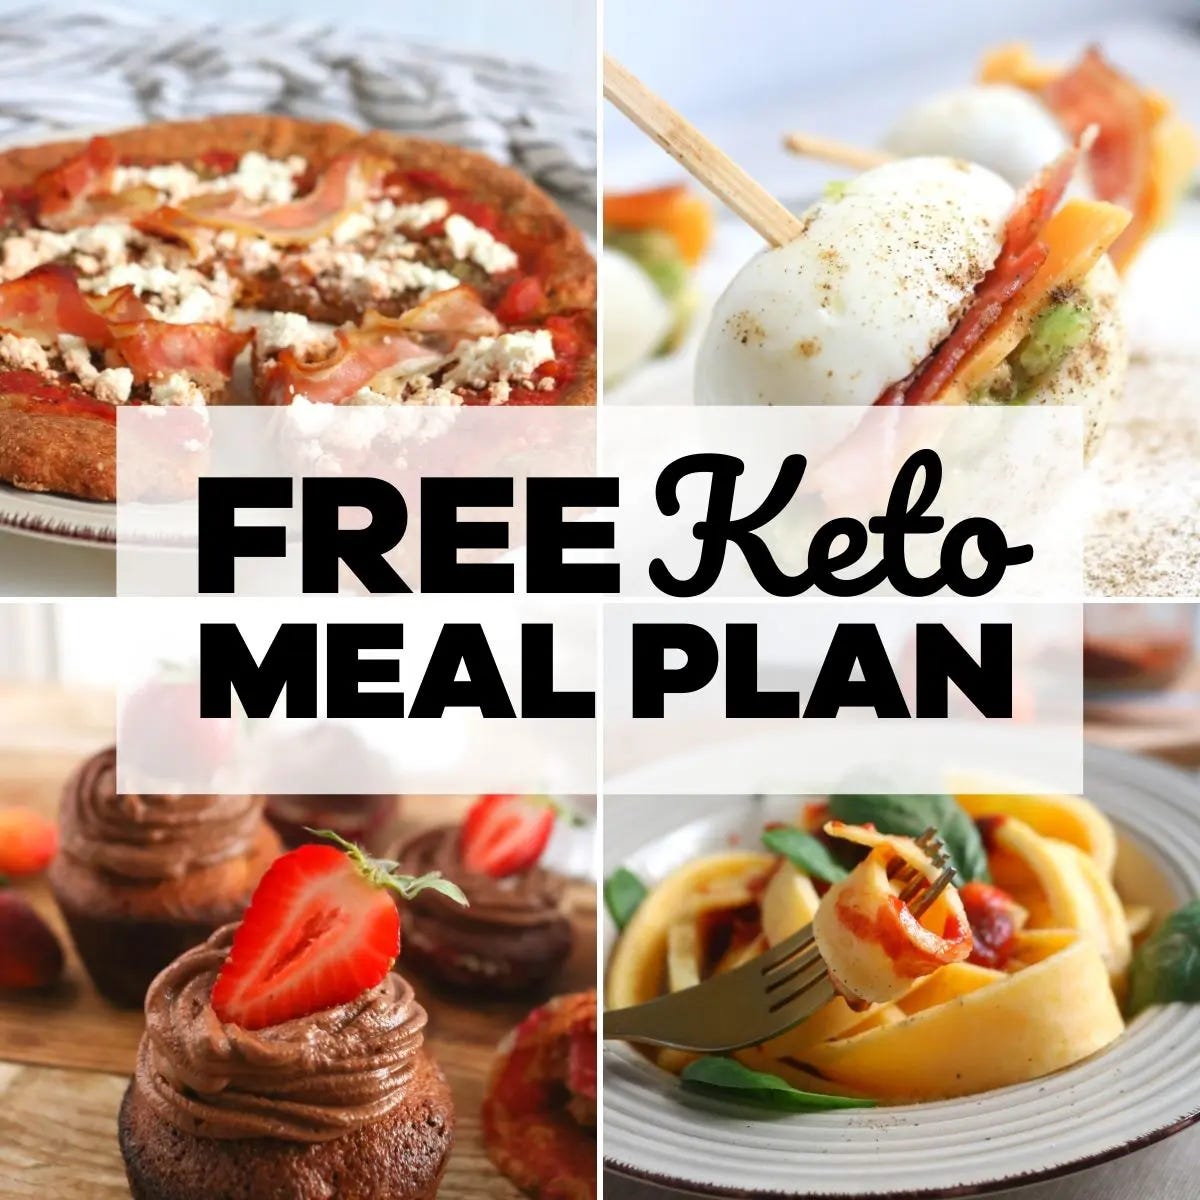 19-DAY KETO DIET PLAN FOR BEGINNERS TO GET INTO KETOSIS - boss - Medium